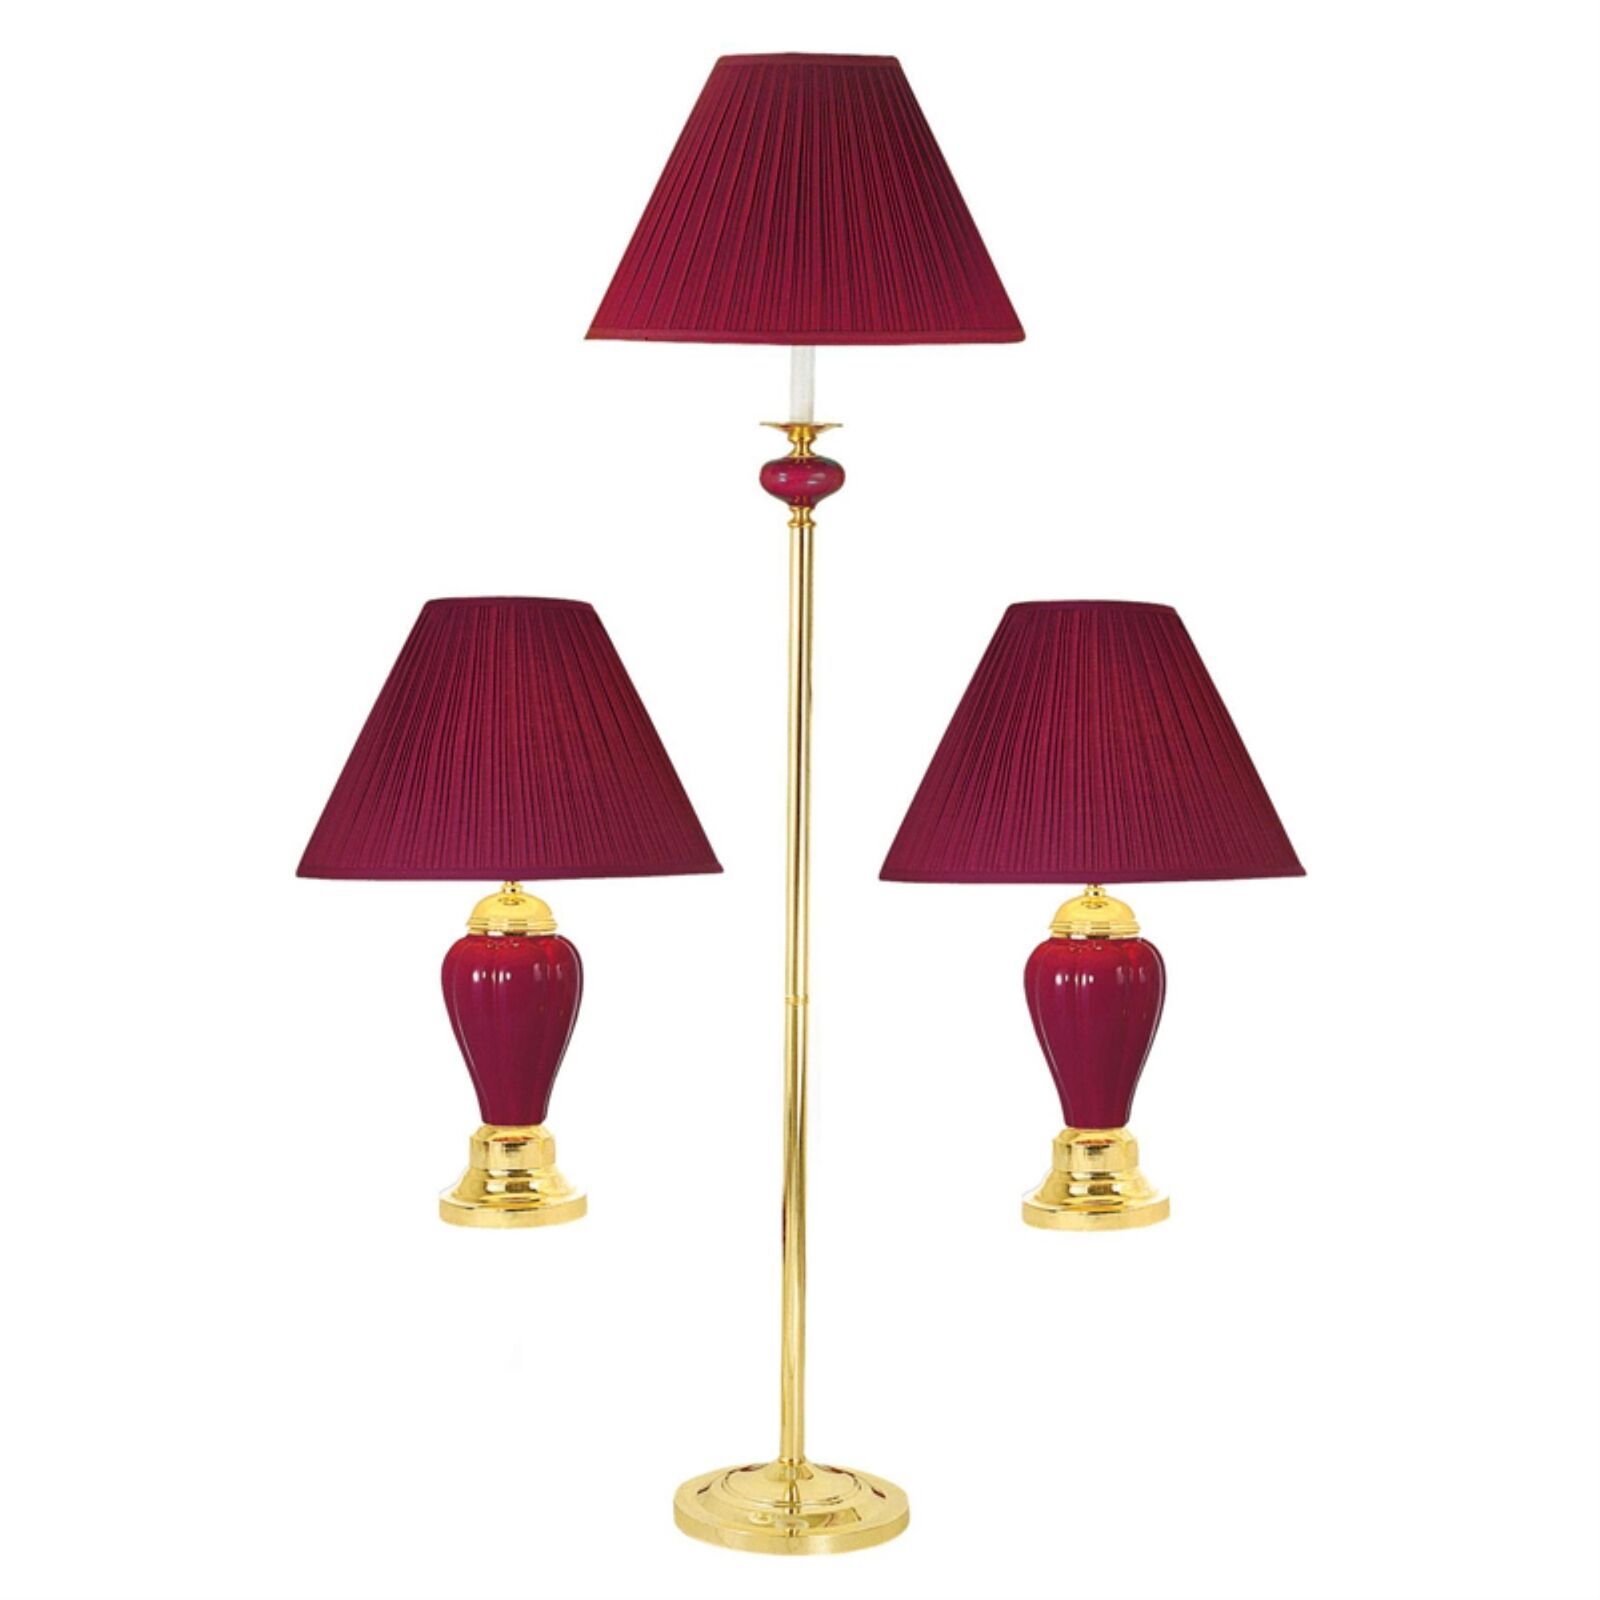 3 Piece Ceramic Lamp Set, Floor And Table Lamps, Burgundy Finish | Ebay Pertaining To 3 Piece Setfloor Lamps (Photo 3 of 15)